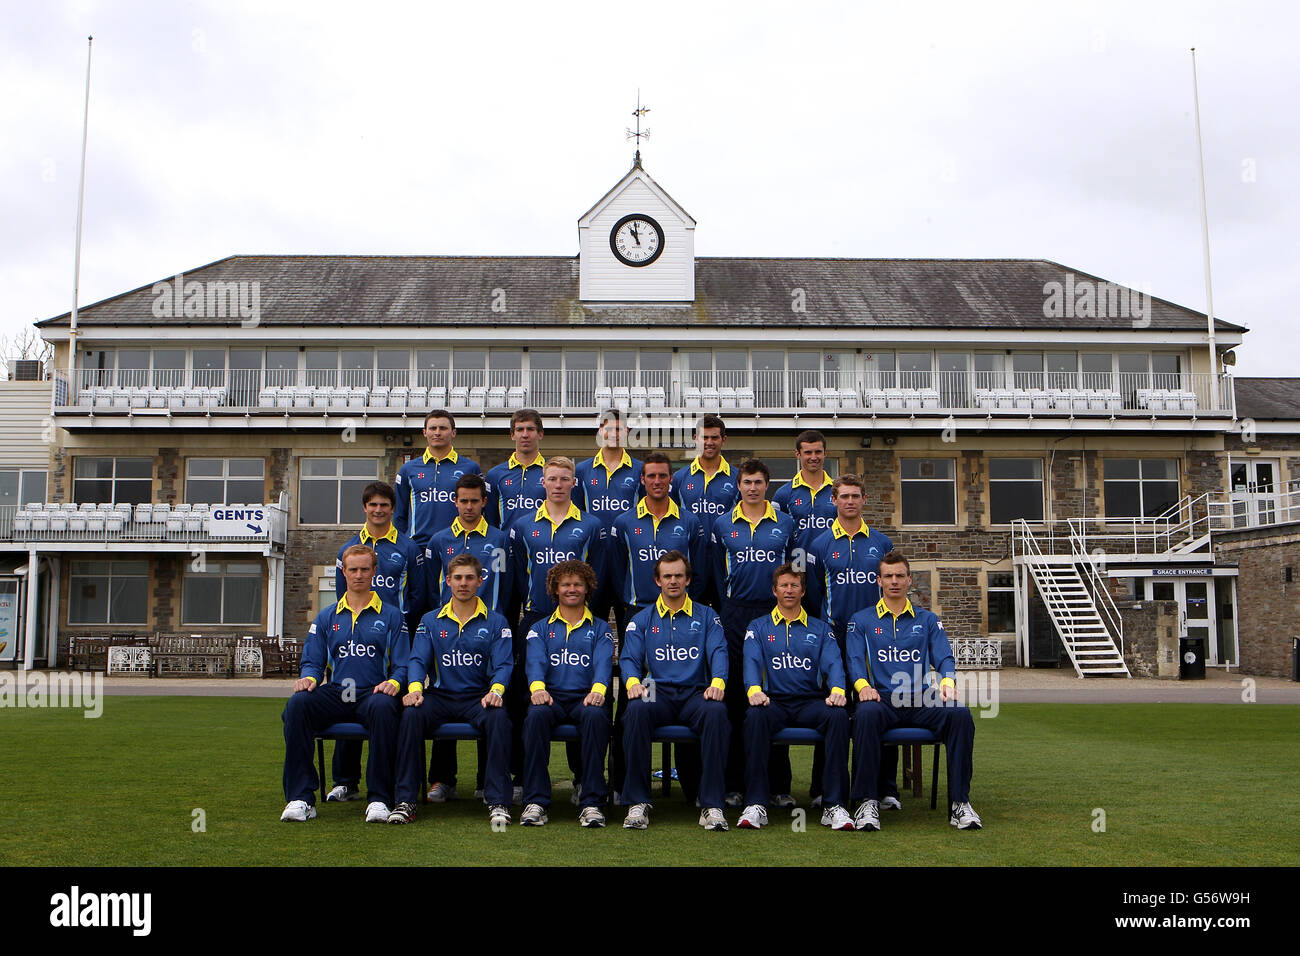 The Gloucestershire County cricket club team photo in Twenty20 kit (bottom row left to right) Ian Saxelby, Chris Dent, Hamish Marshall, Captain Alex Gidman, Jonathan Batty, Will Gidman (middle row left to right) Richard Coughtrie, Jack Taylor, Liam Norwell, David Wade, James Fuller, Ian Cockbain, (top row left to right) Paul Muchall, Graeme McCarter, David Payne, Ed Young, Dan Housego Stock Photo